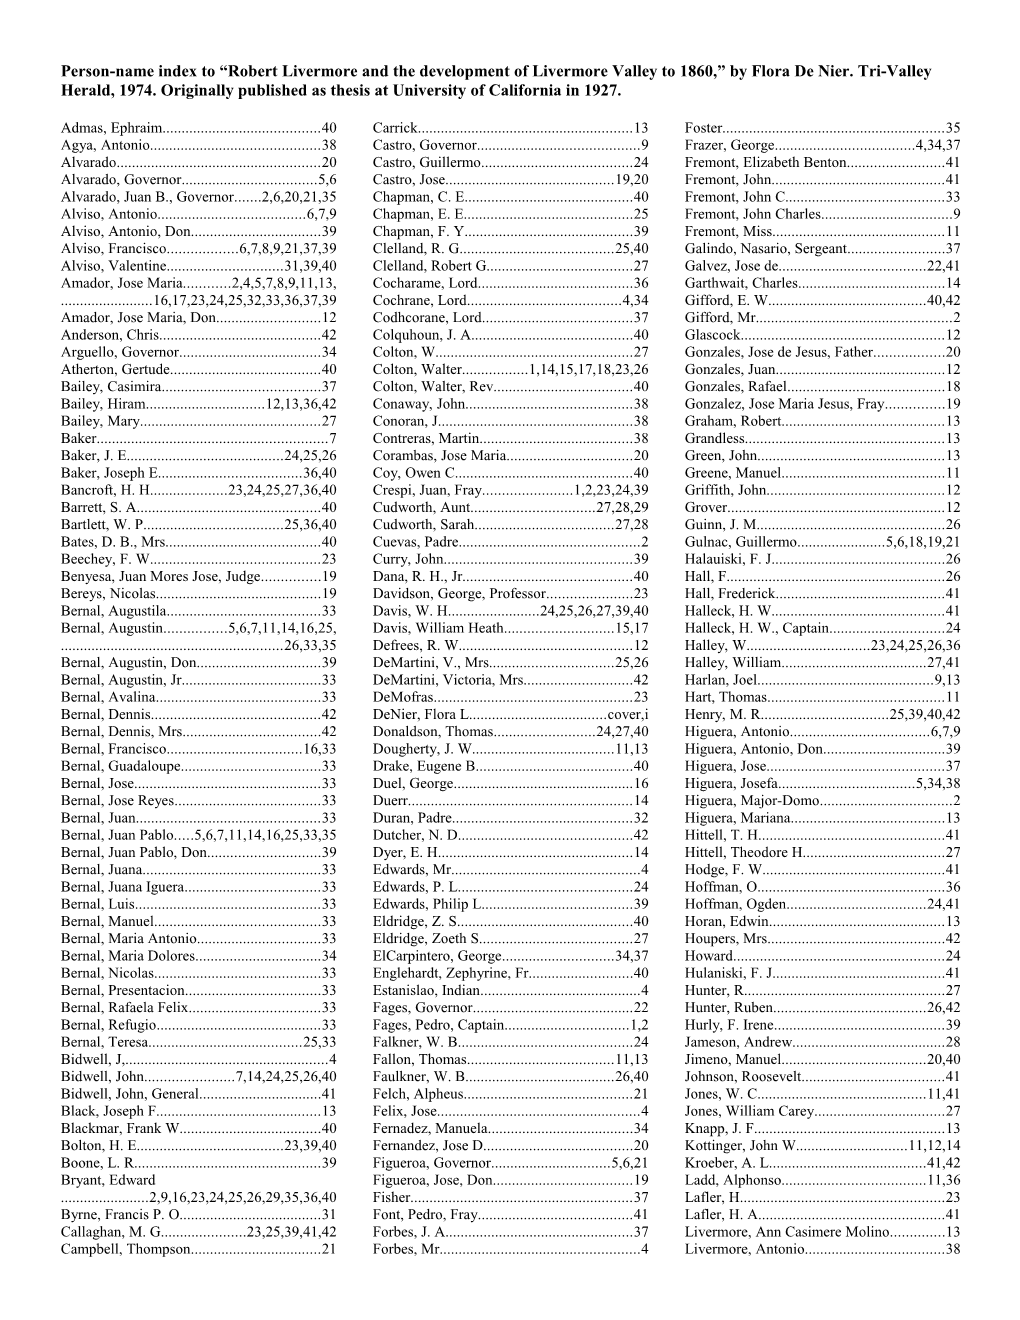 Person-Name Index to Robert Livermore and the Development of Livermore Valley to 1860